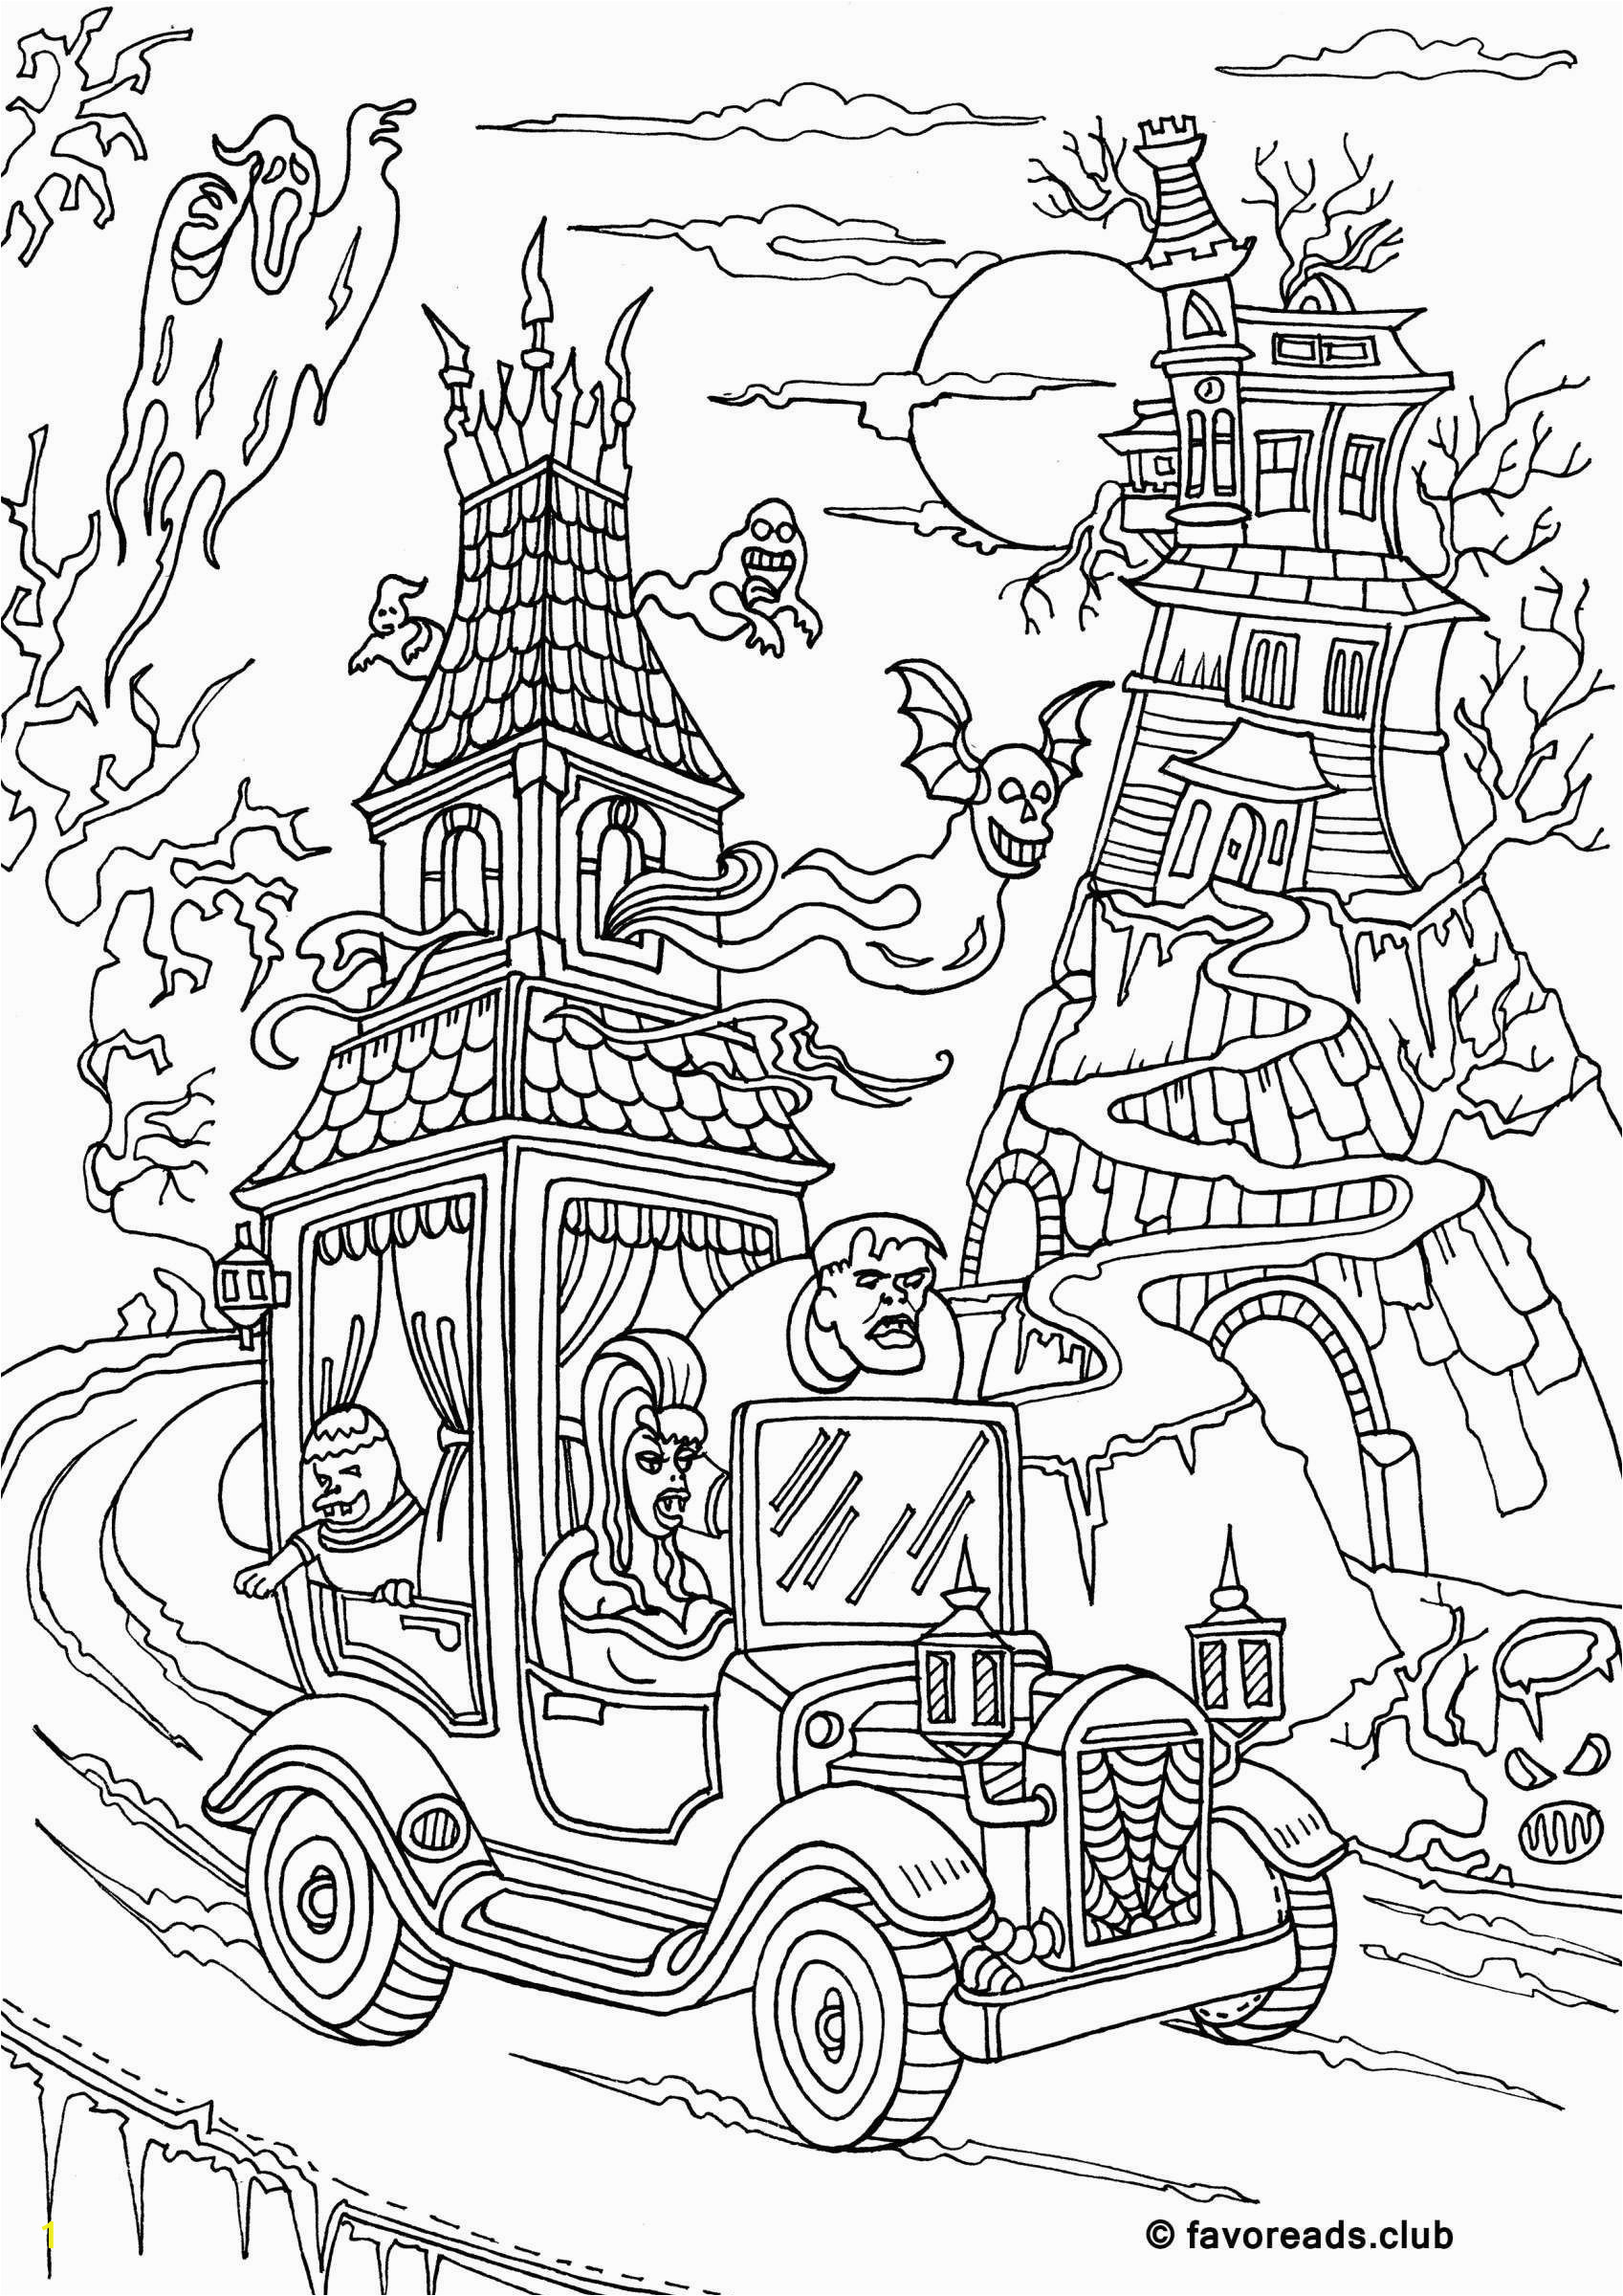 Full Size Printable Halloween Coloring Pages the Best Free Adult Coloring Book Pages